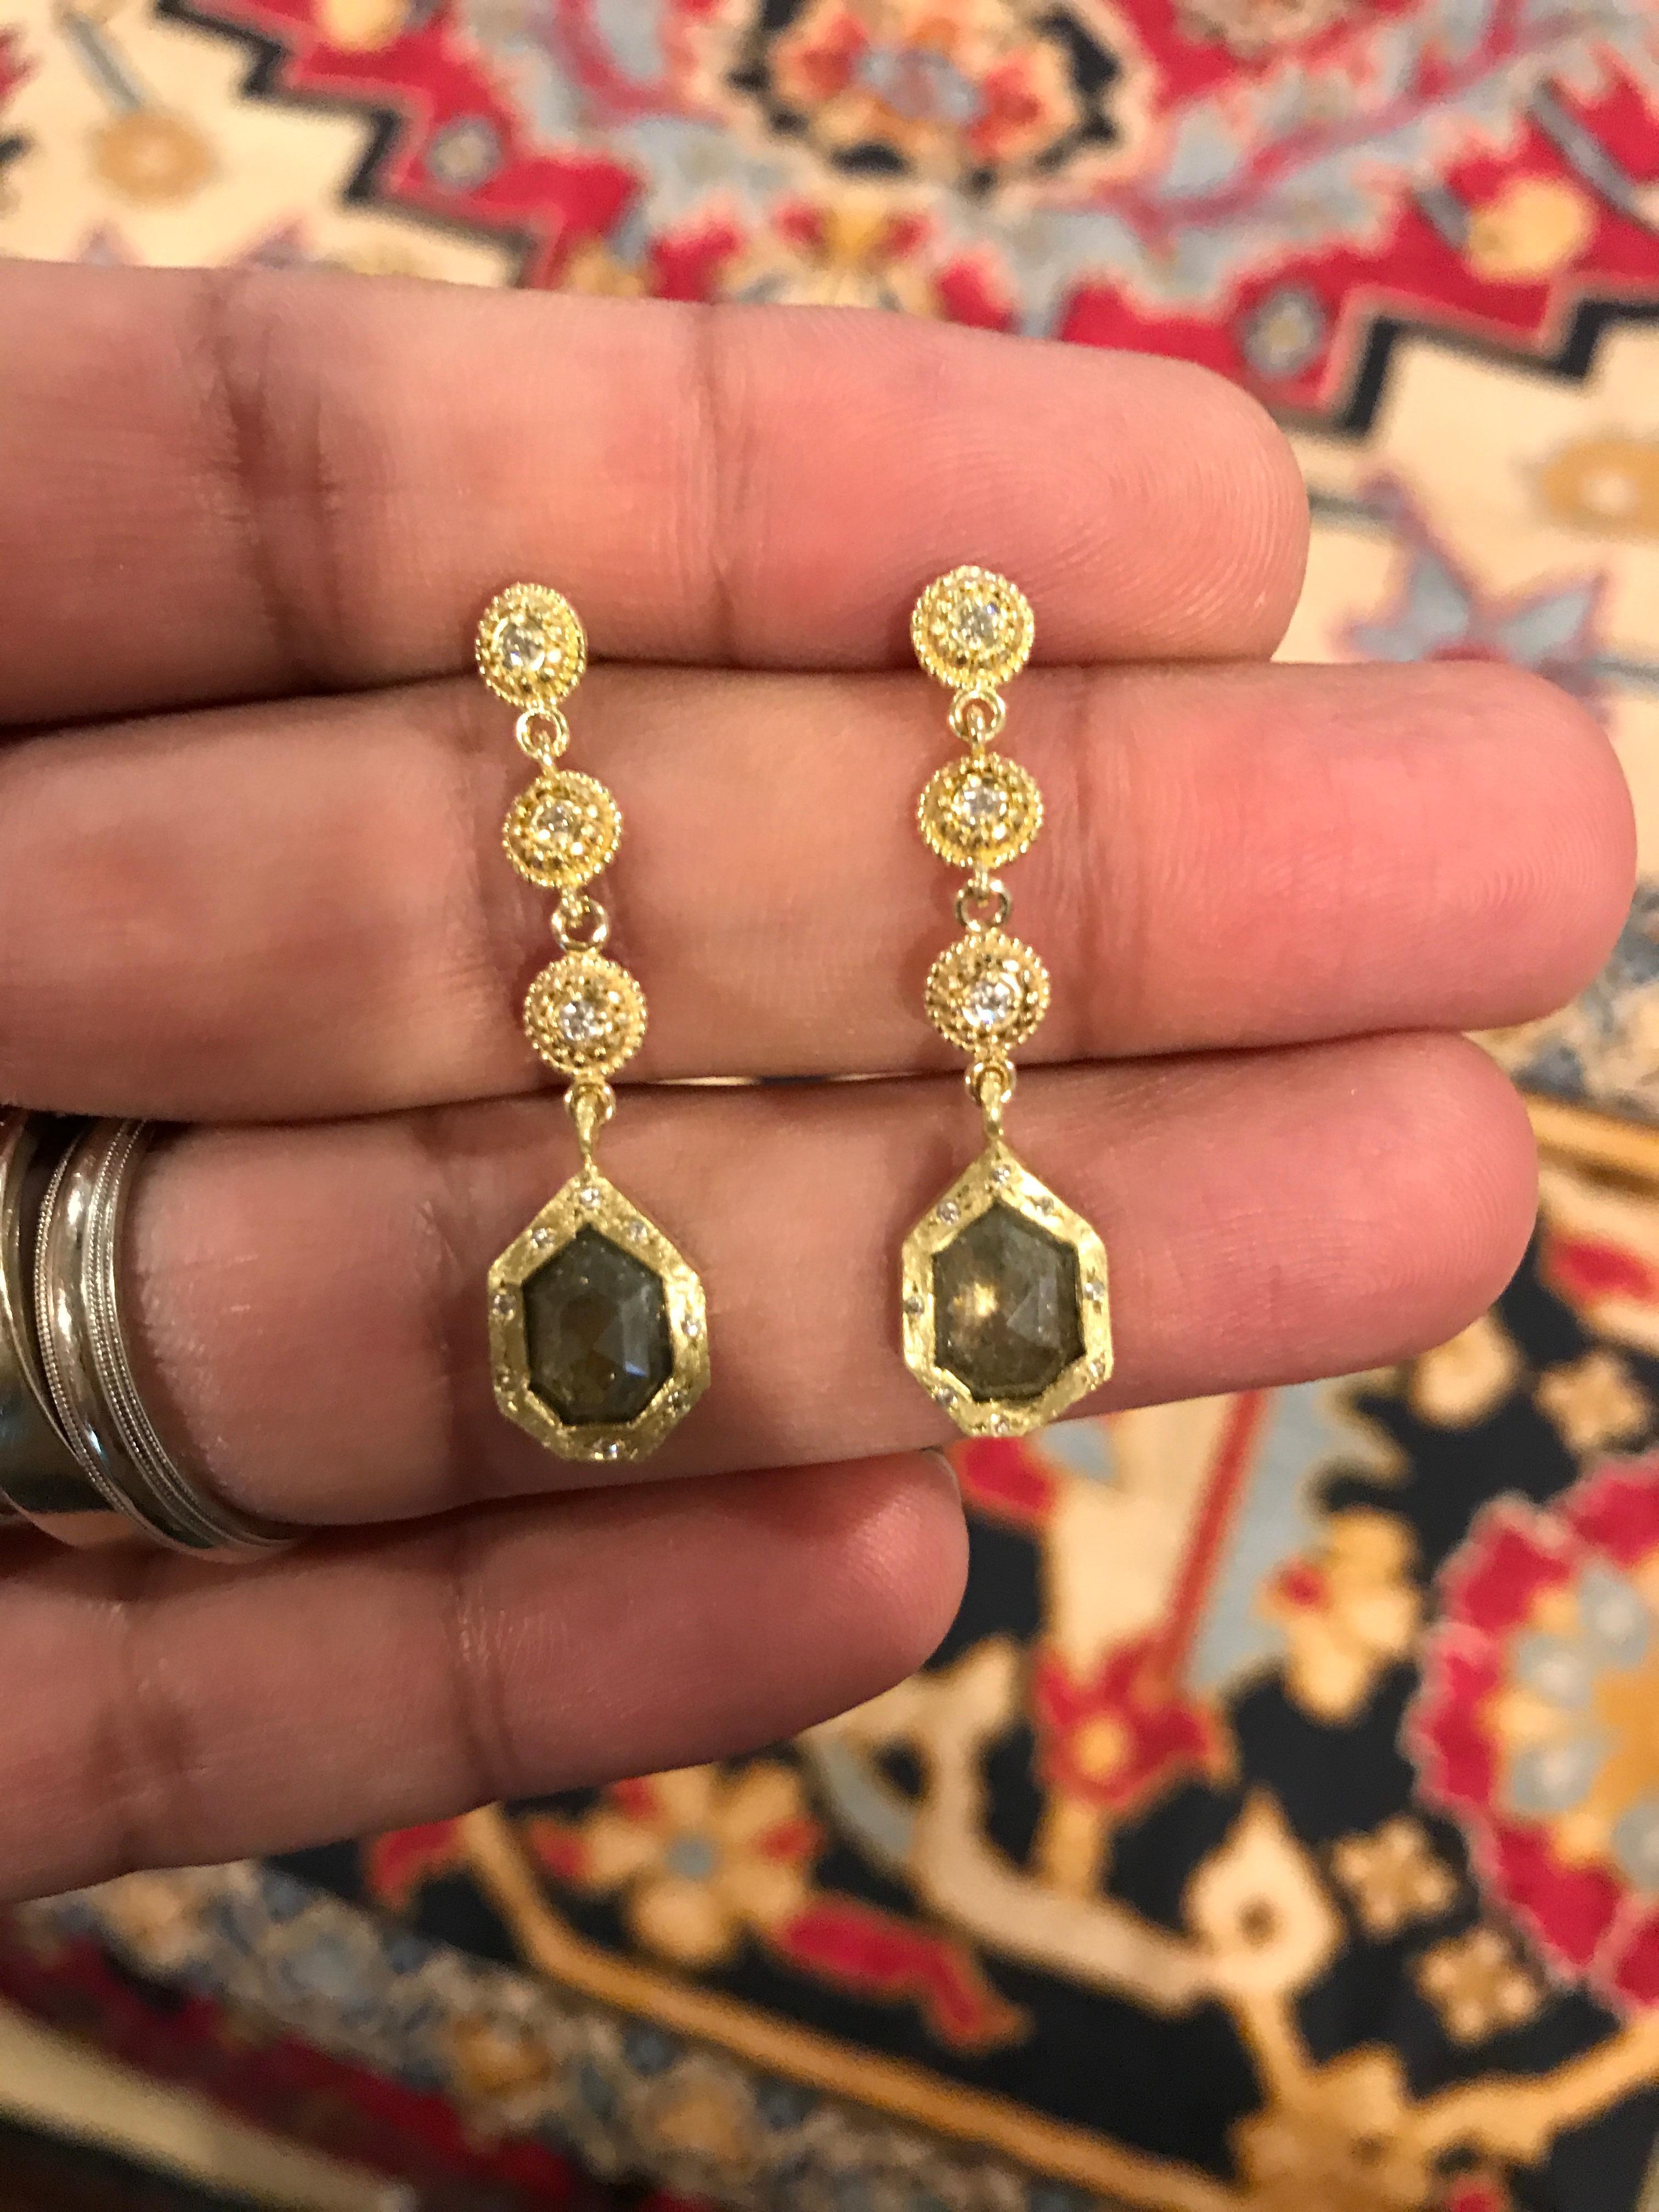  Natural Color Trapeze Rosecut and White Diamond Earrings in 18k Yellow Gold designed by Amyn The Jeweler.

Pair of Trapeze diamonds 3.65 cts.

6 white diamond weight 0.18cts.. 

Total diamond weight 3.83 cts

Passionately Created and Made in Los